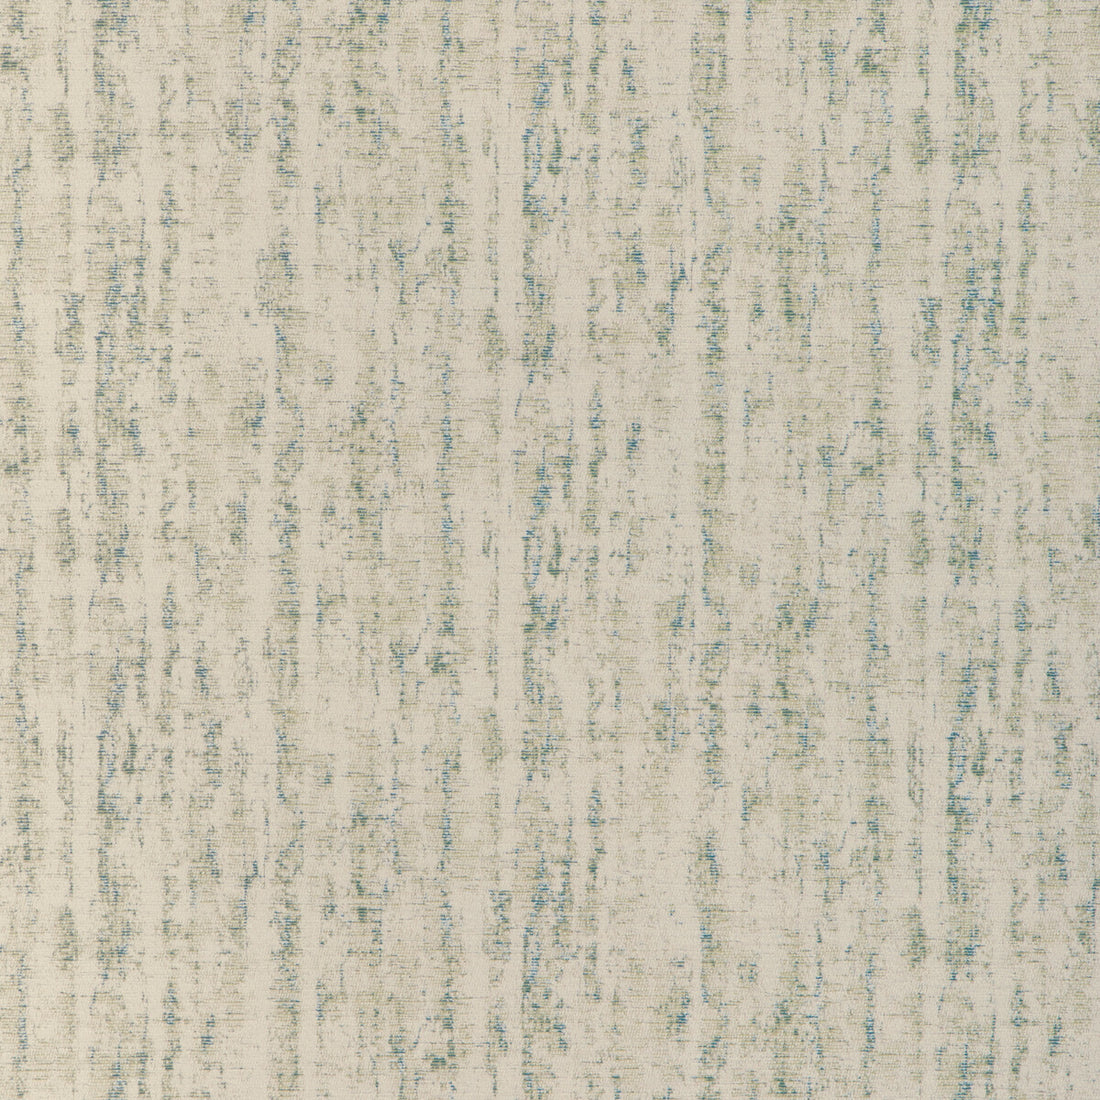 Mossi fabric in spring color - pattern 37071.1623.0 - by Kravet Contract in the Chesapeake collection